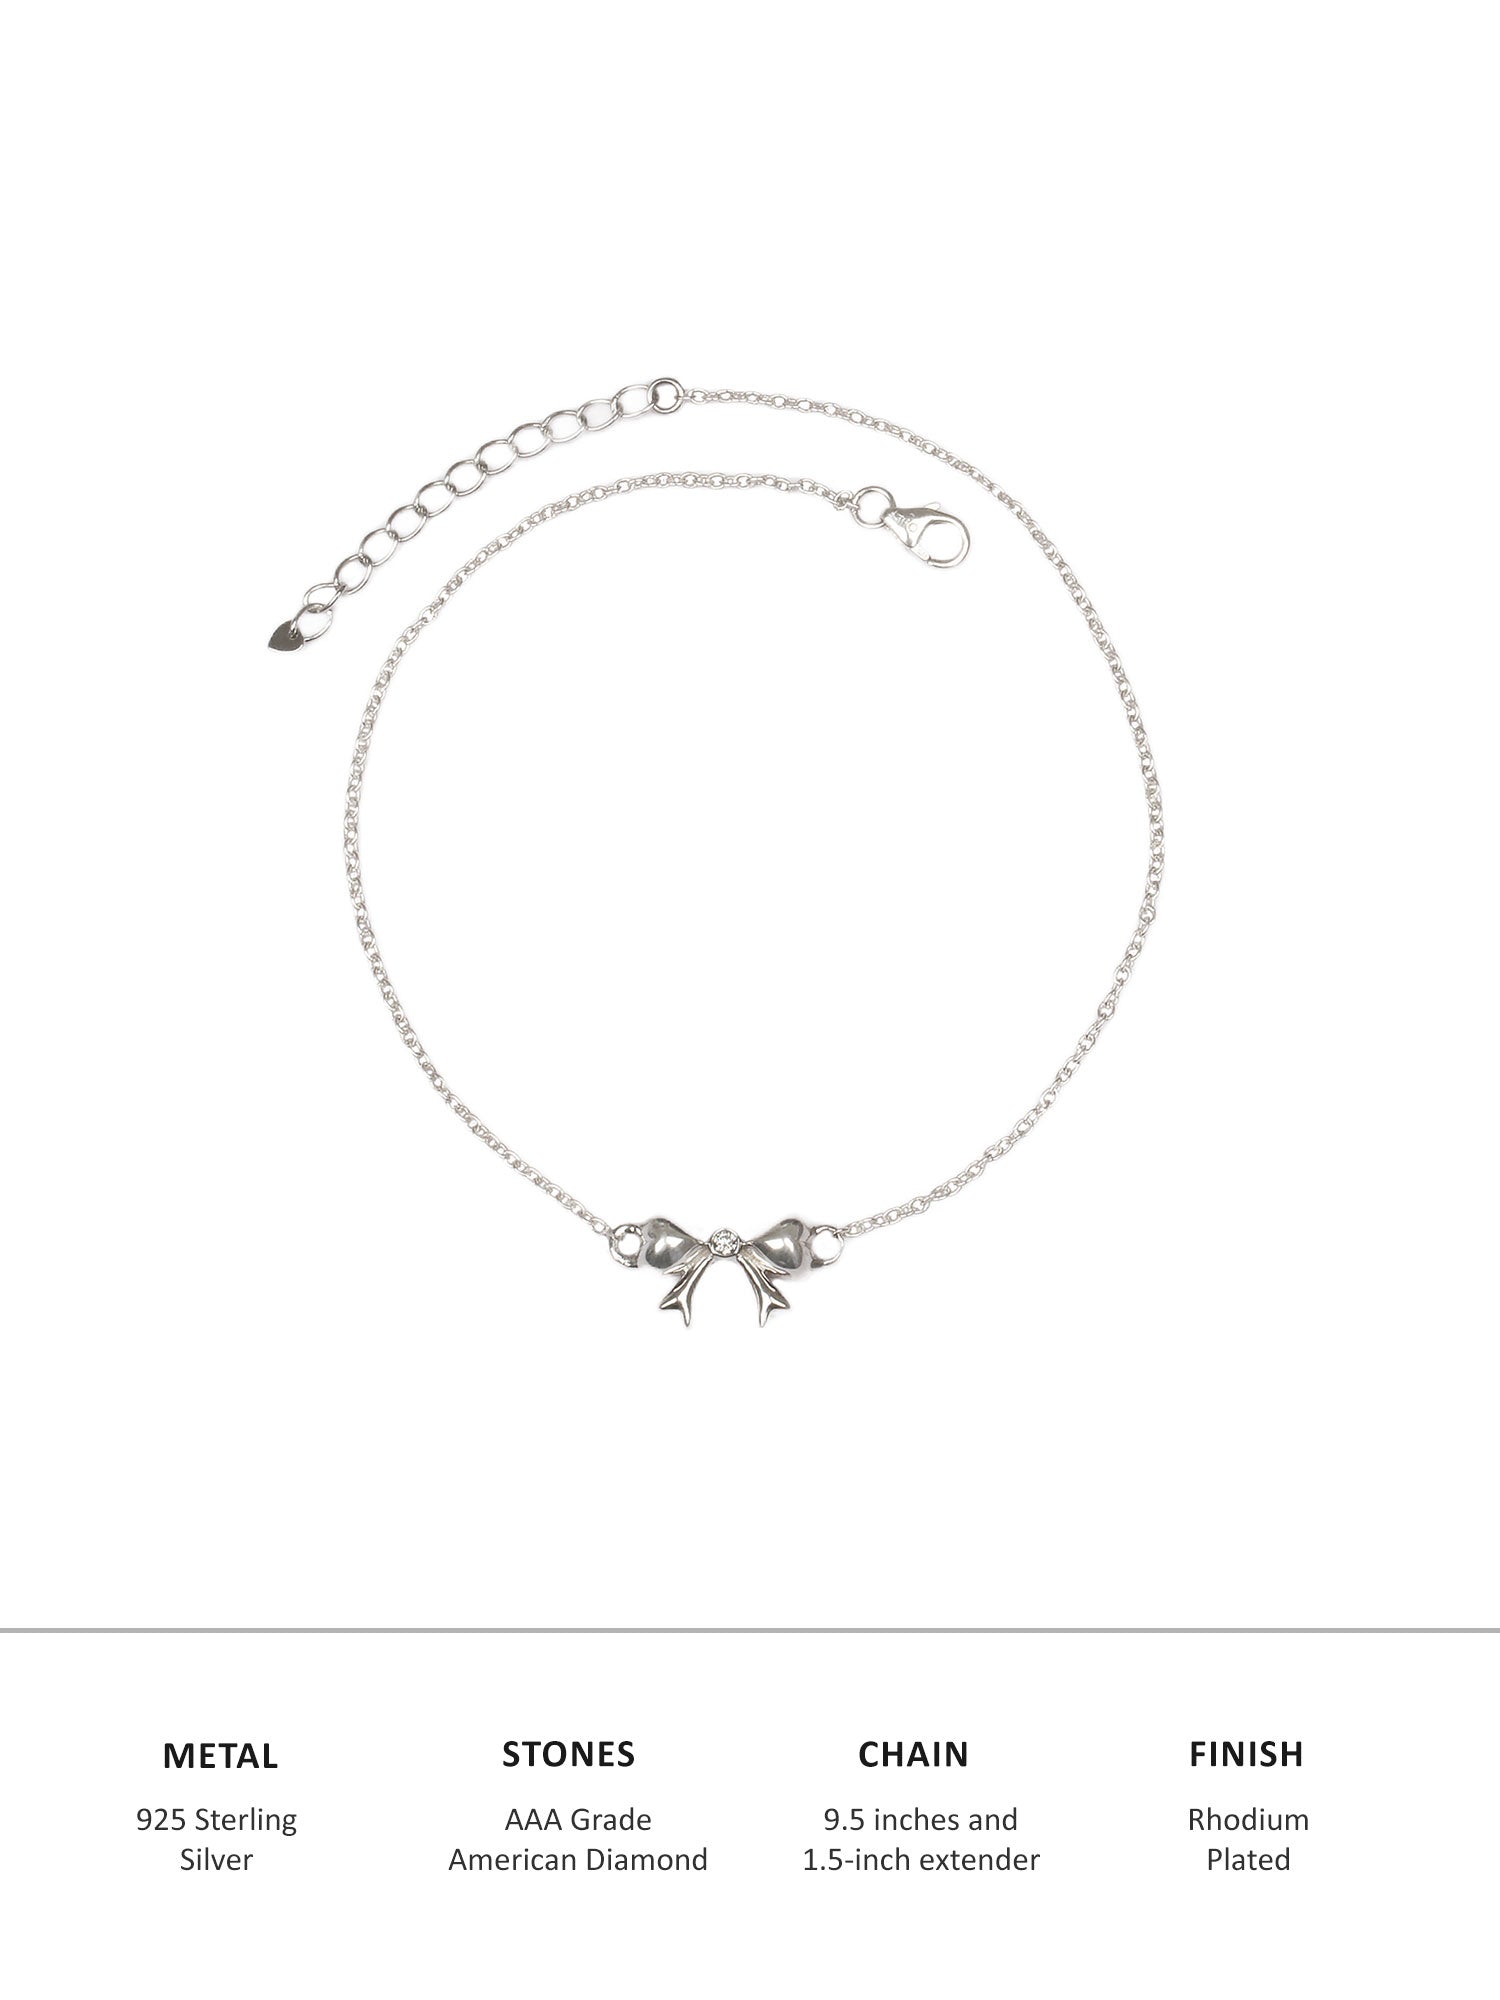 PURE 925 STERLING SILVER BOW DESIGN ANKLET FOR WOMEN